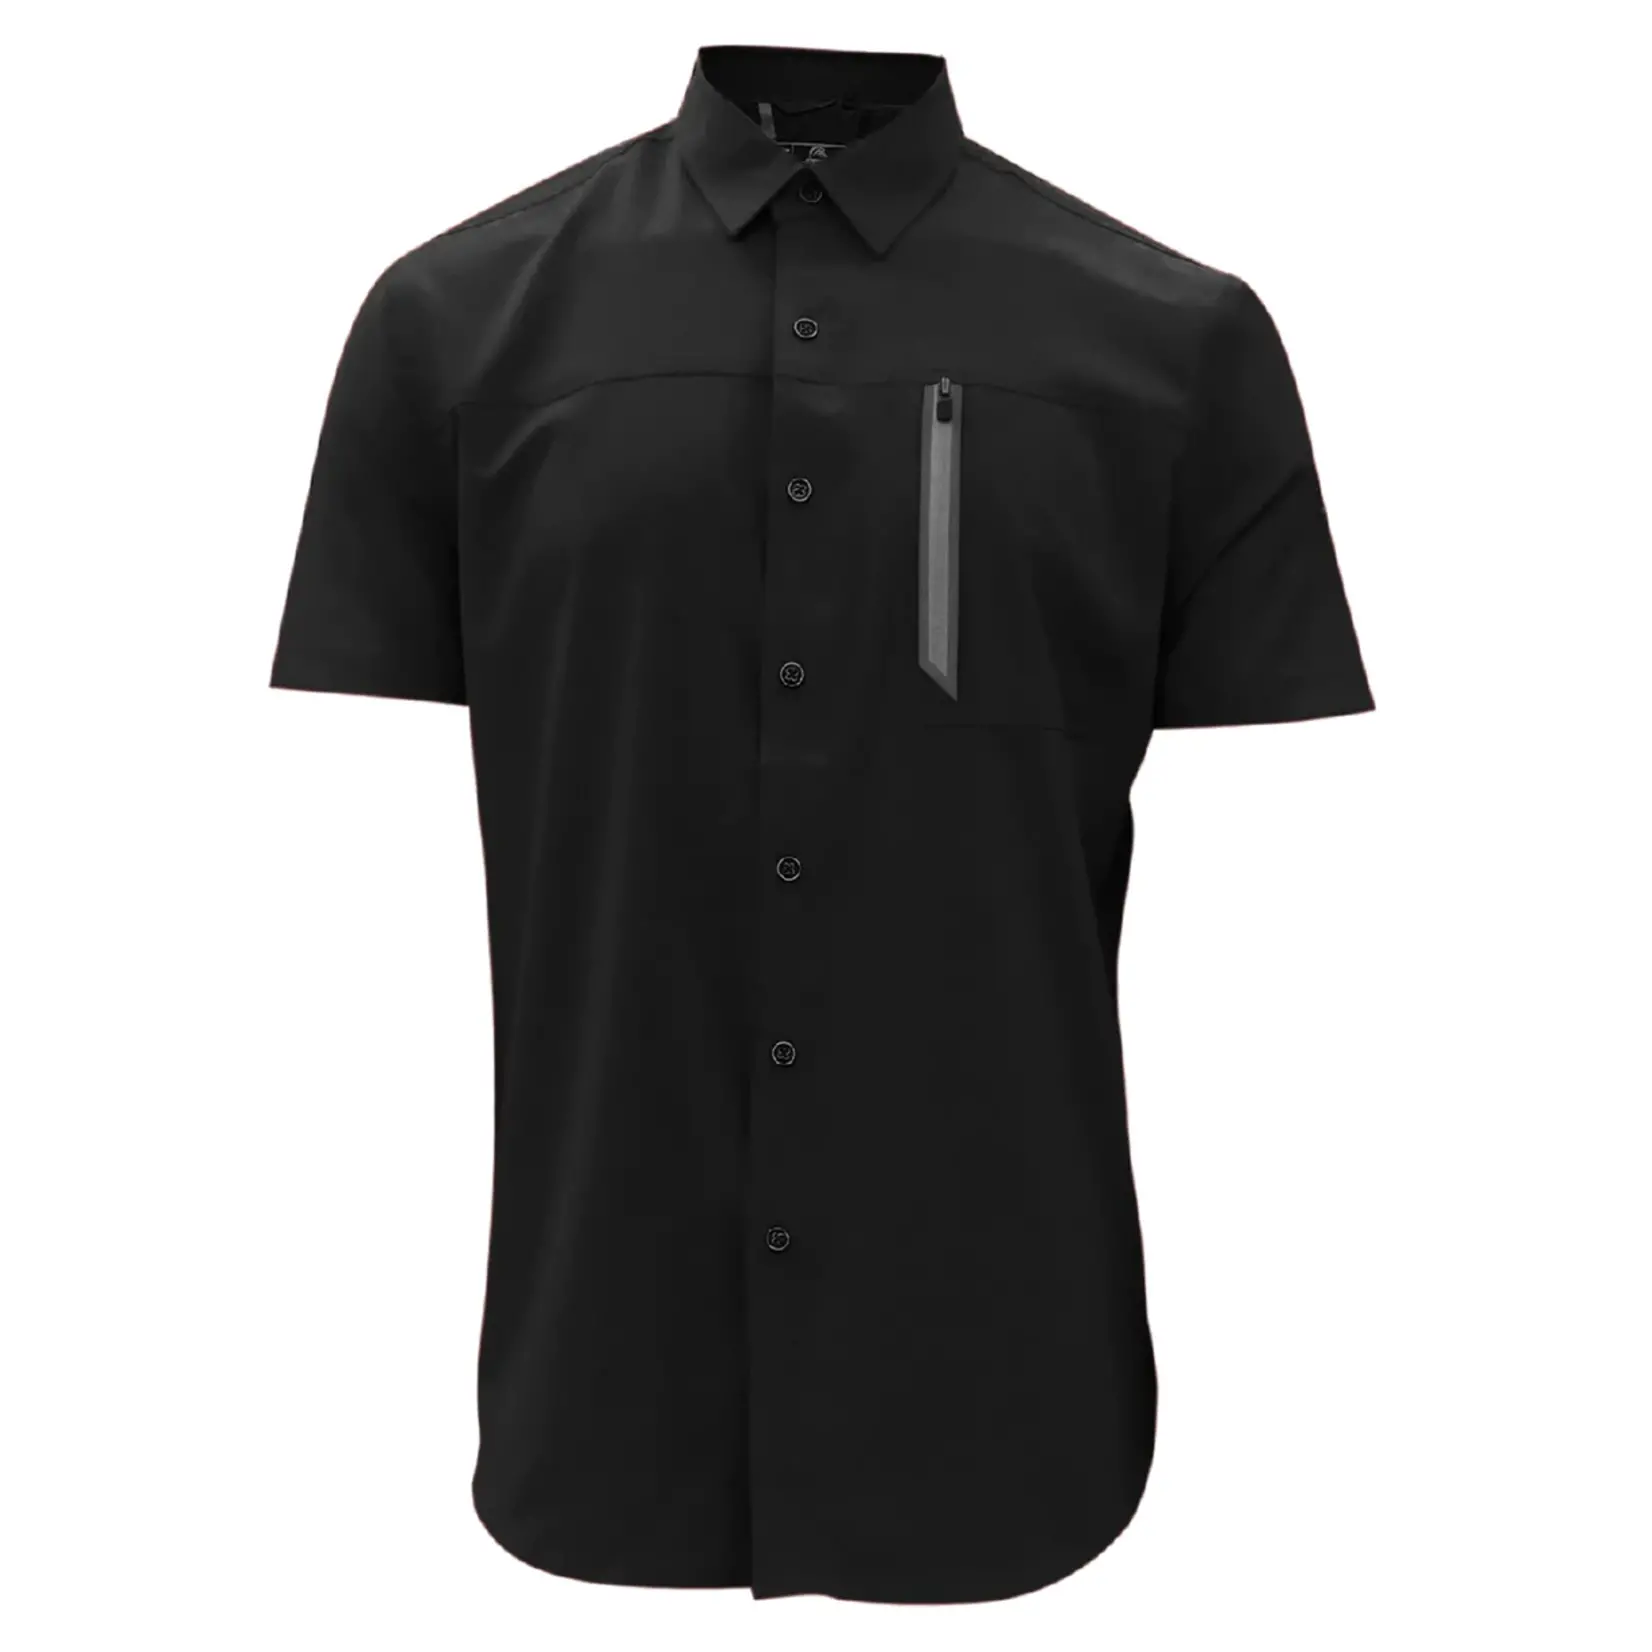 Point Zero Point Zero mens solid 4 way stretch short sleeve dry edition button shirt with zip pocket